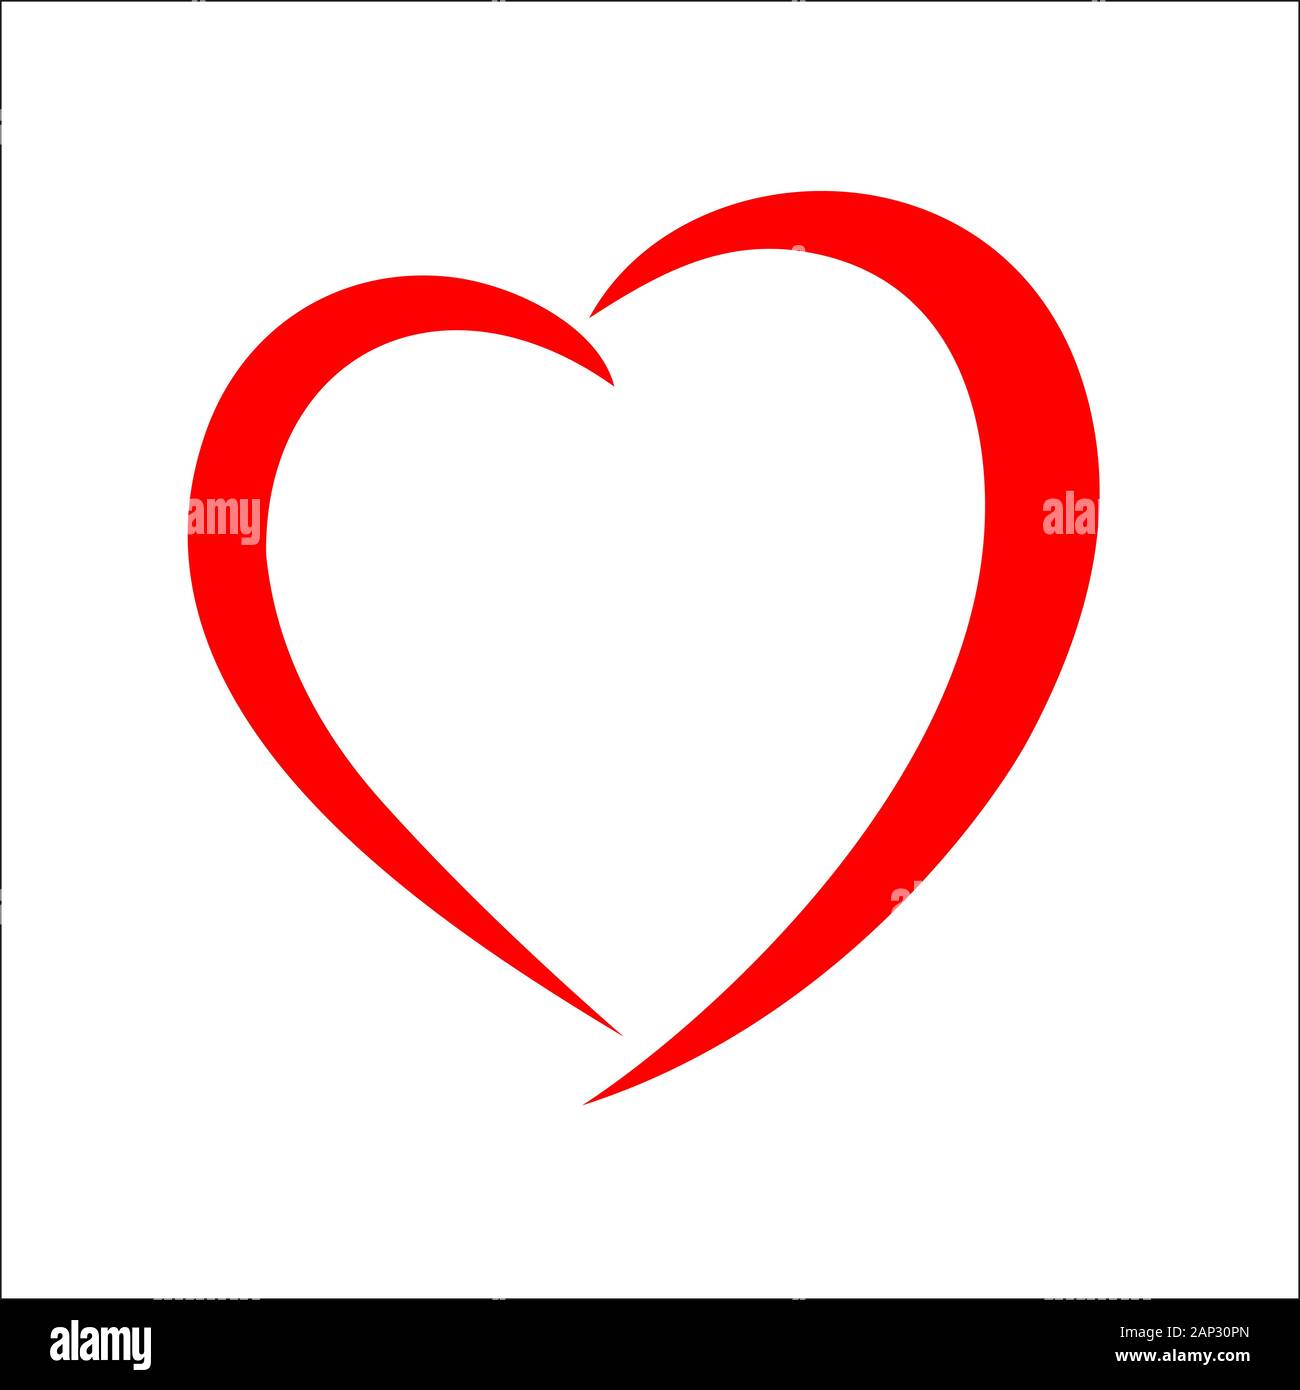 red heart vector background